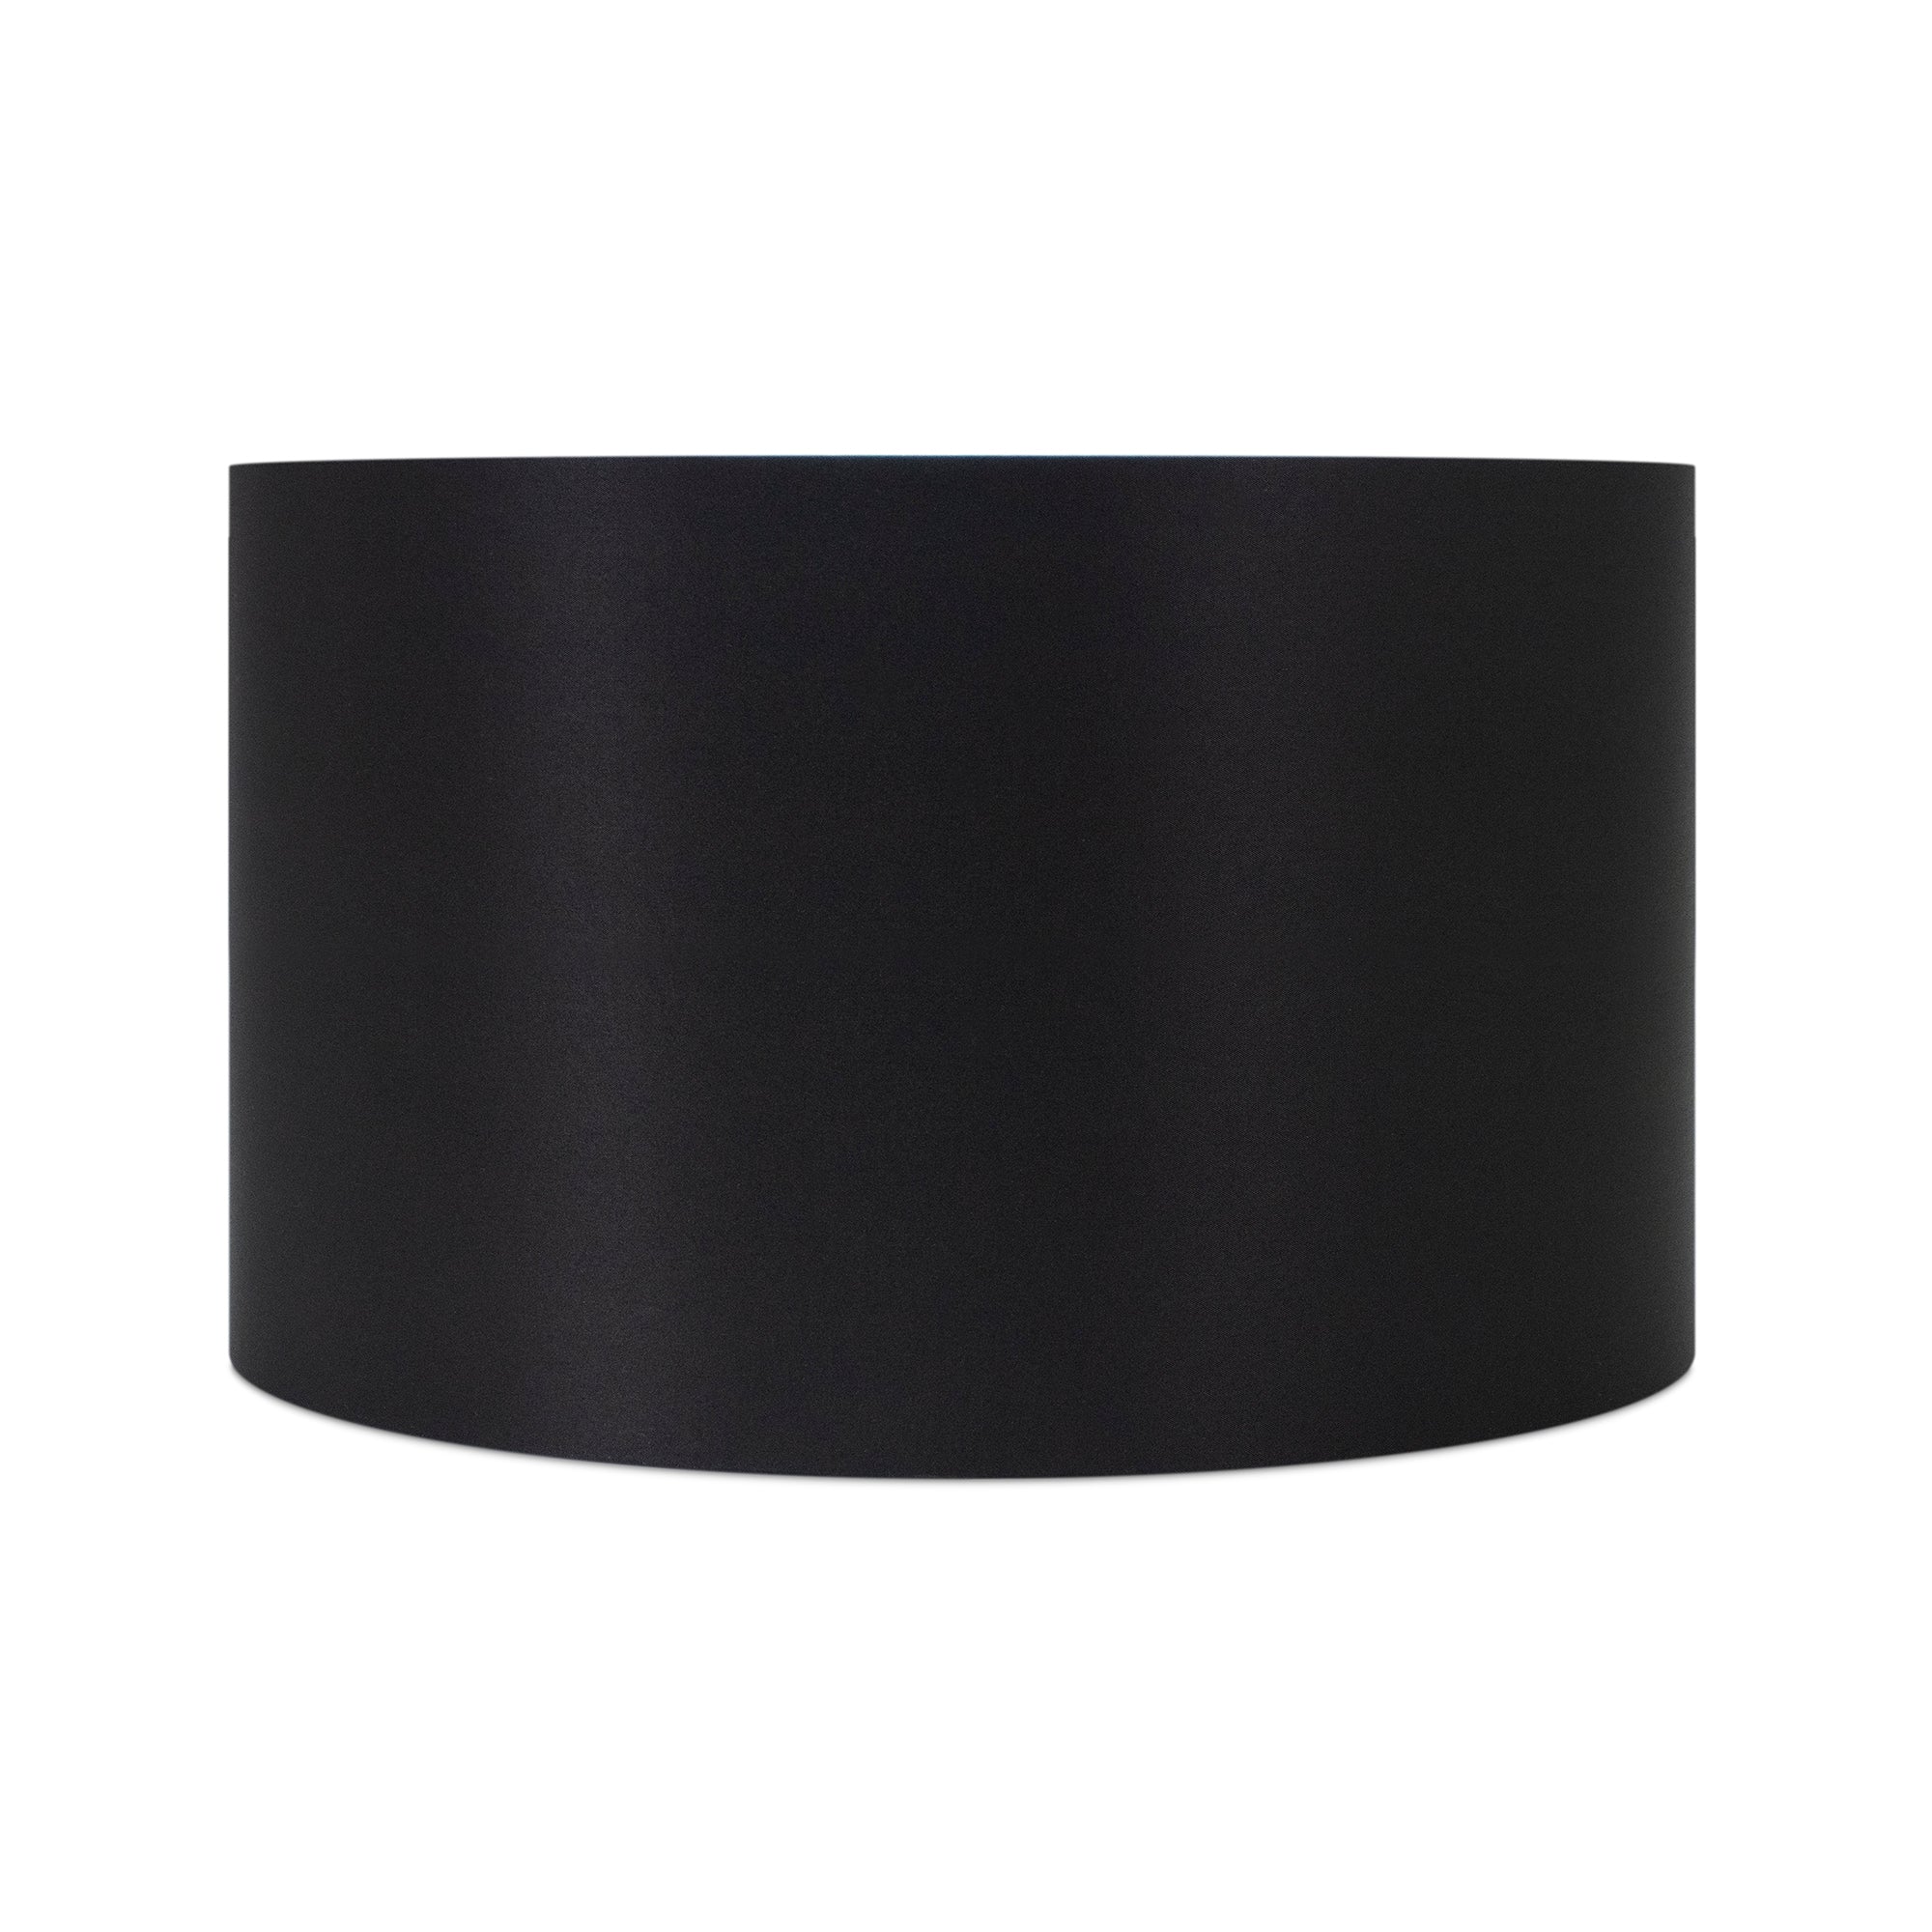 Round Black Linen Drum Shade 15" x 15" x 10" - Couture Lamps